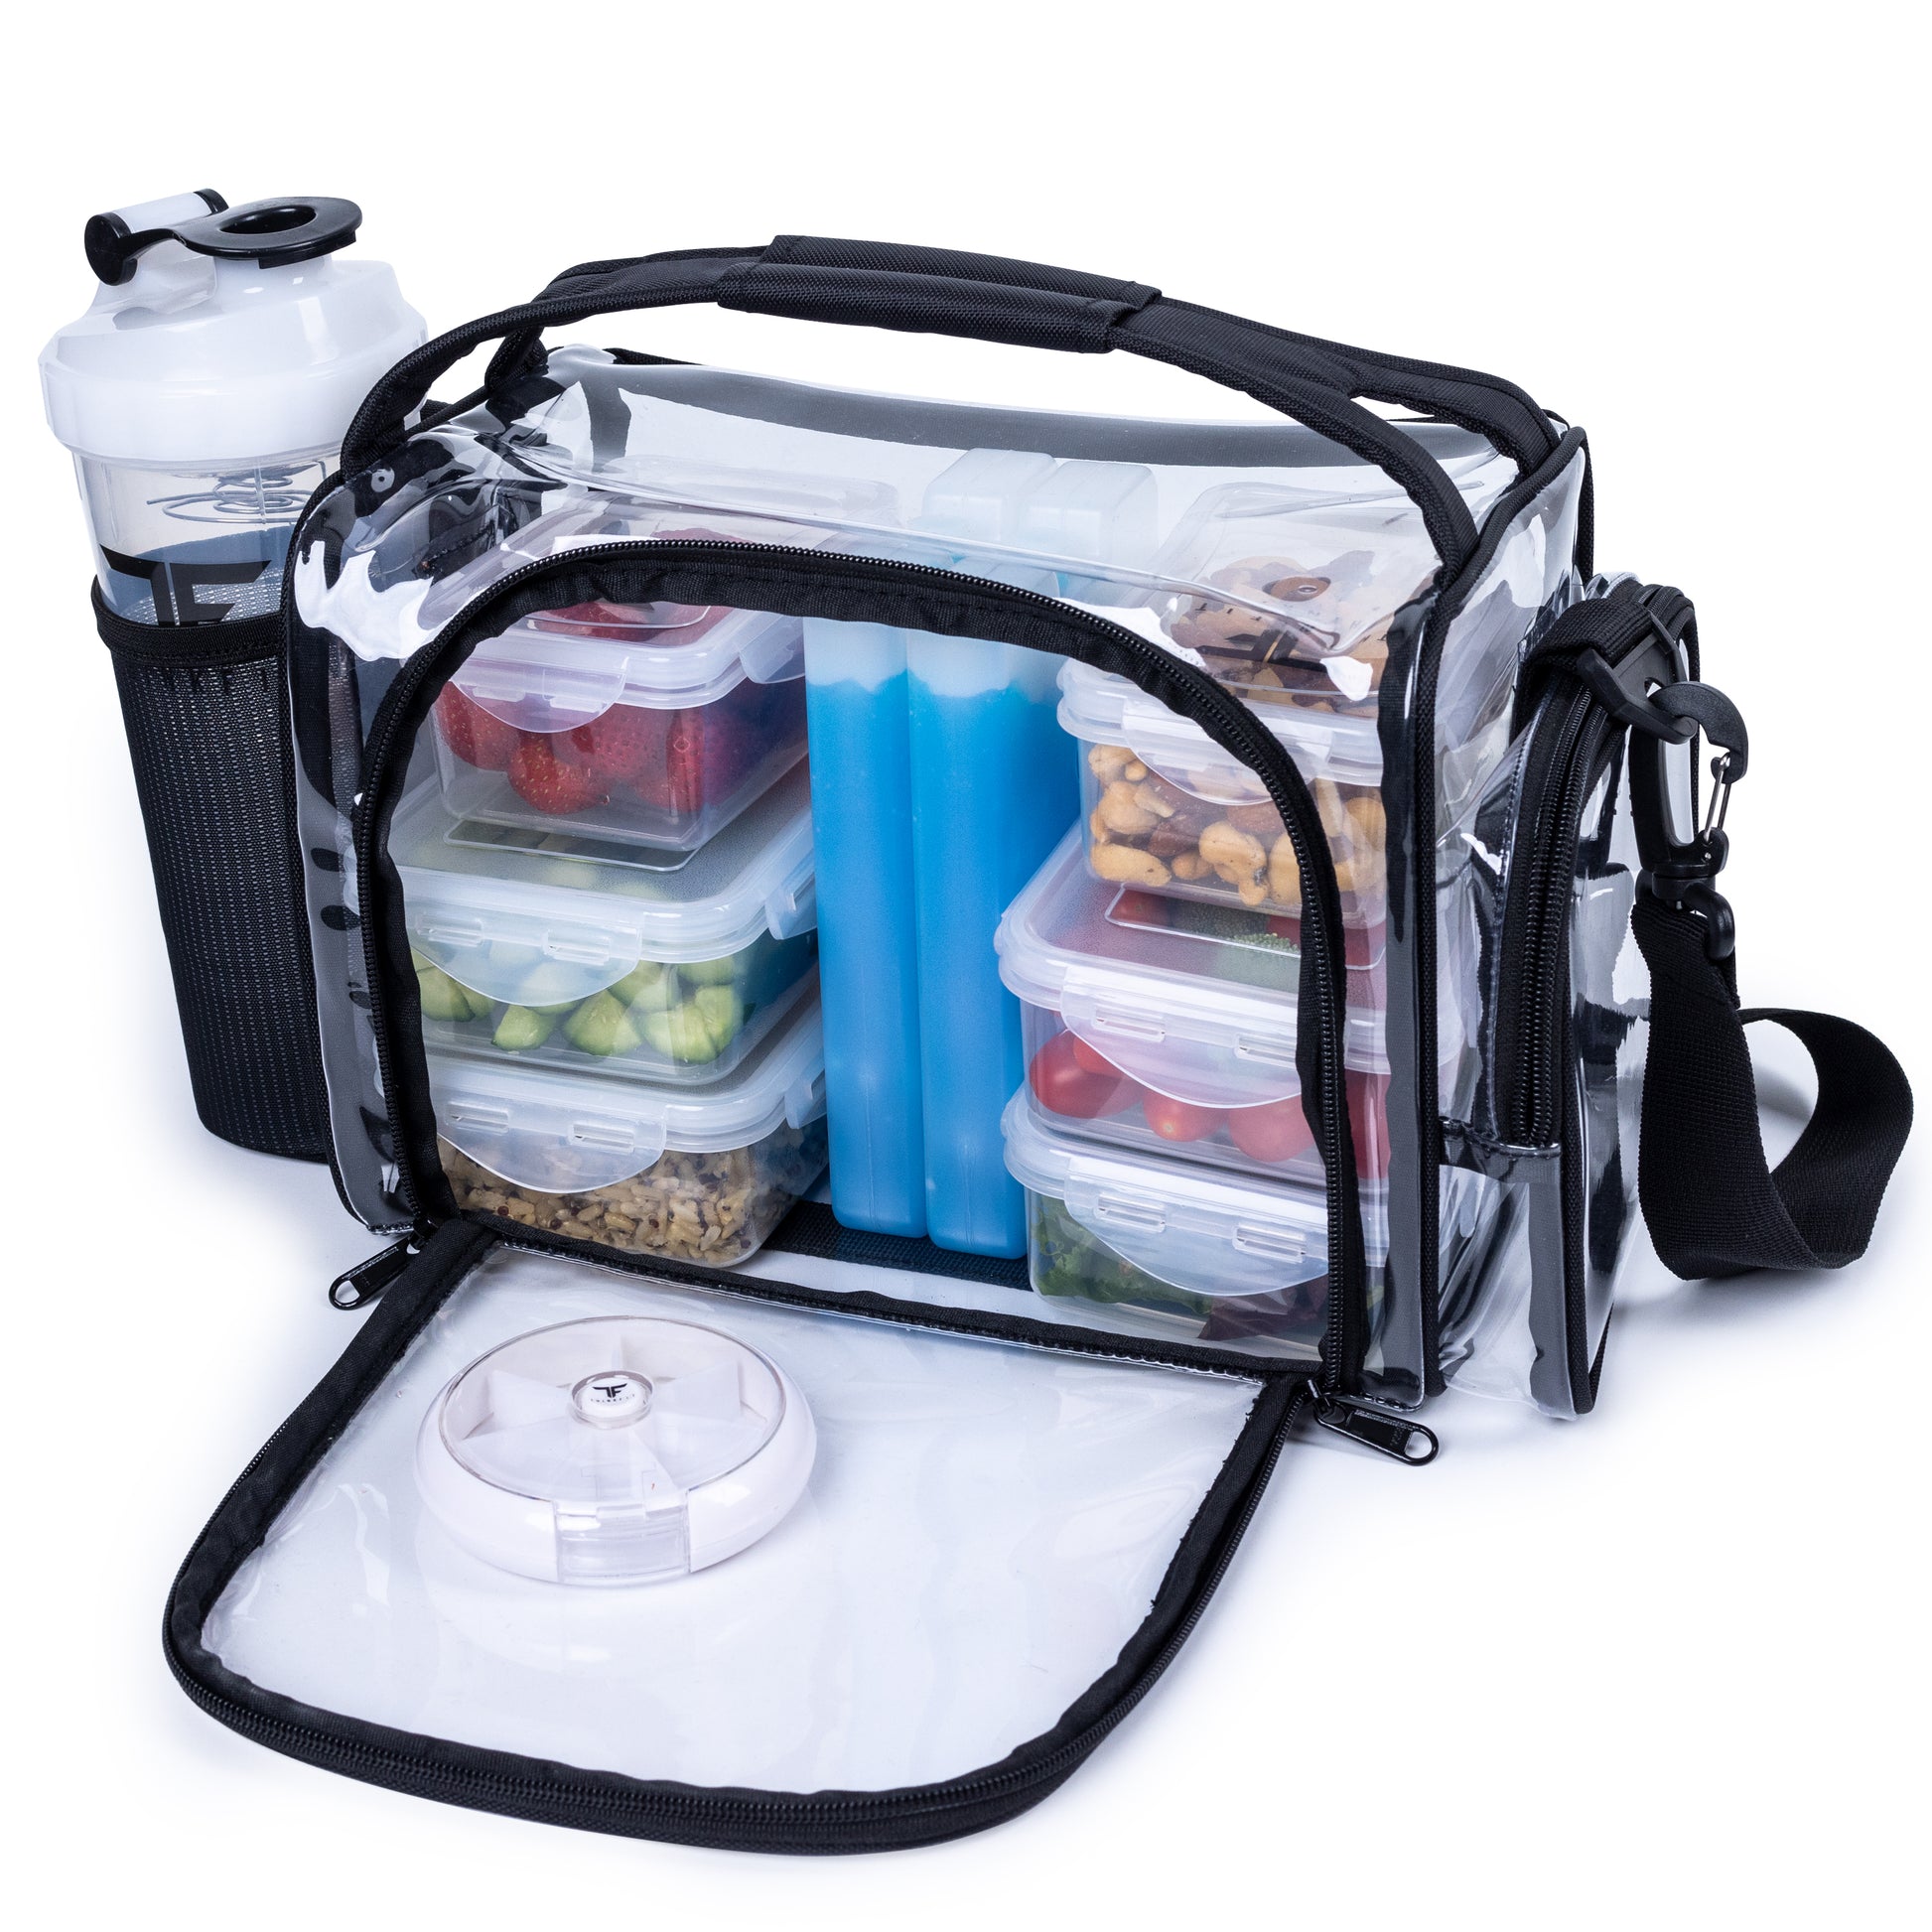 Lunch Bag Small Clear Work See through Plastic Box Adjustable Strap Bag  Reusable